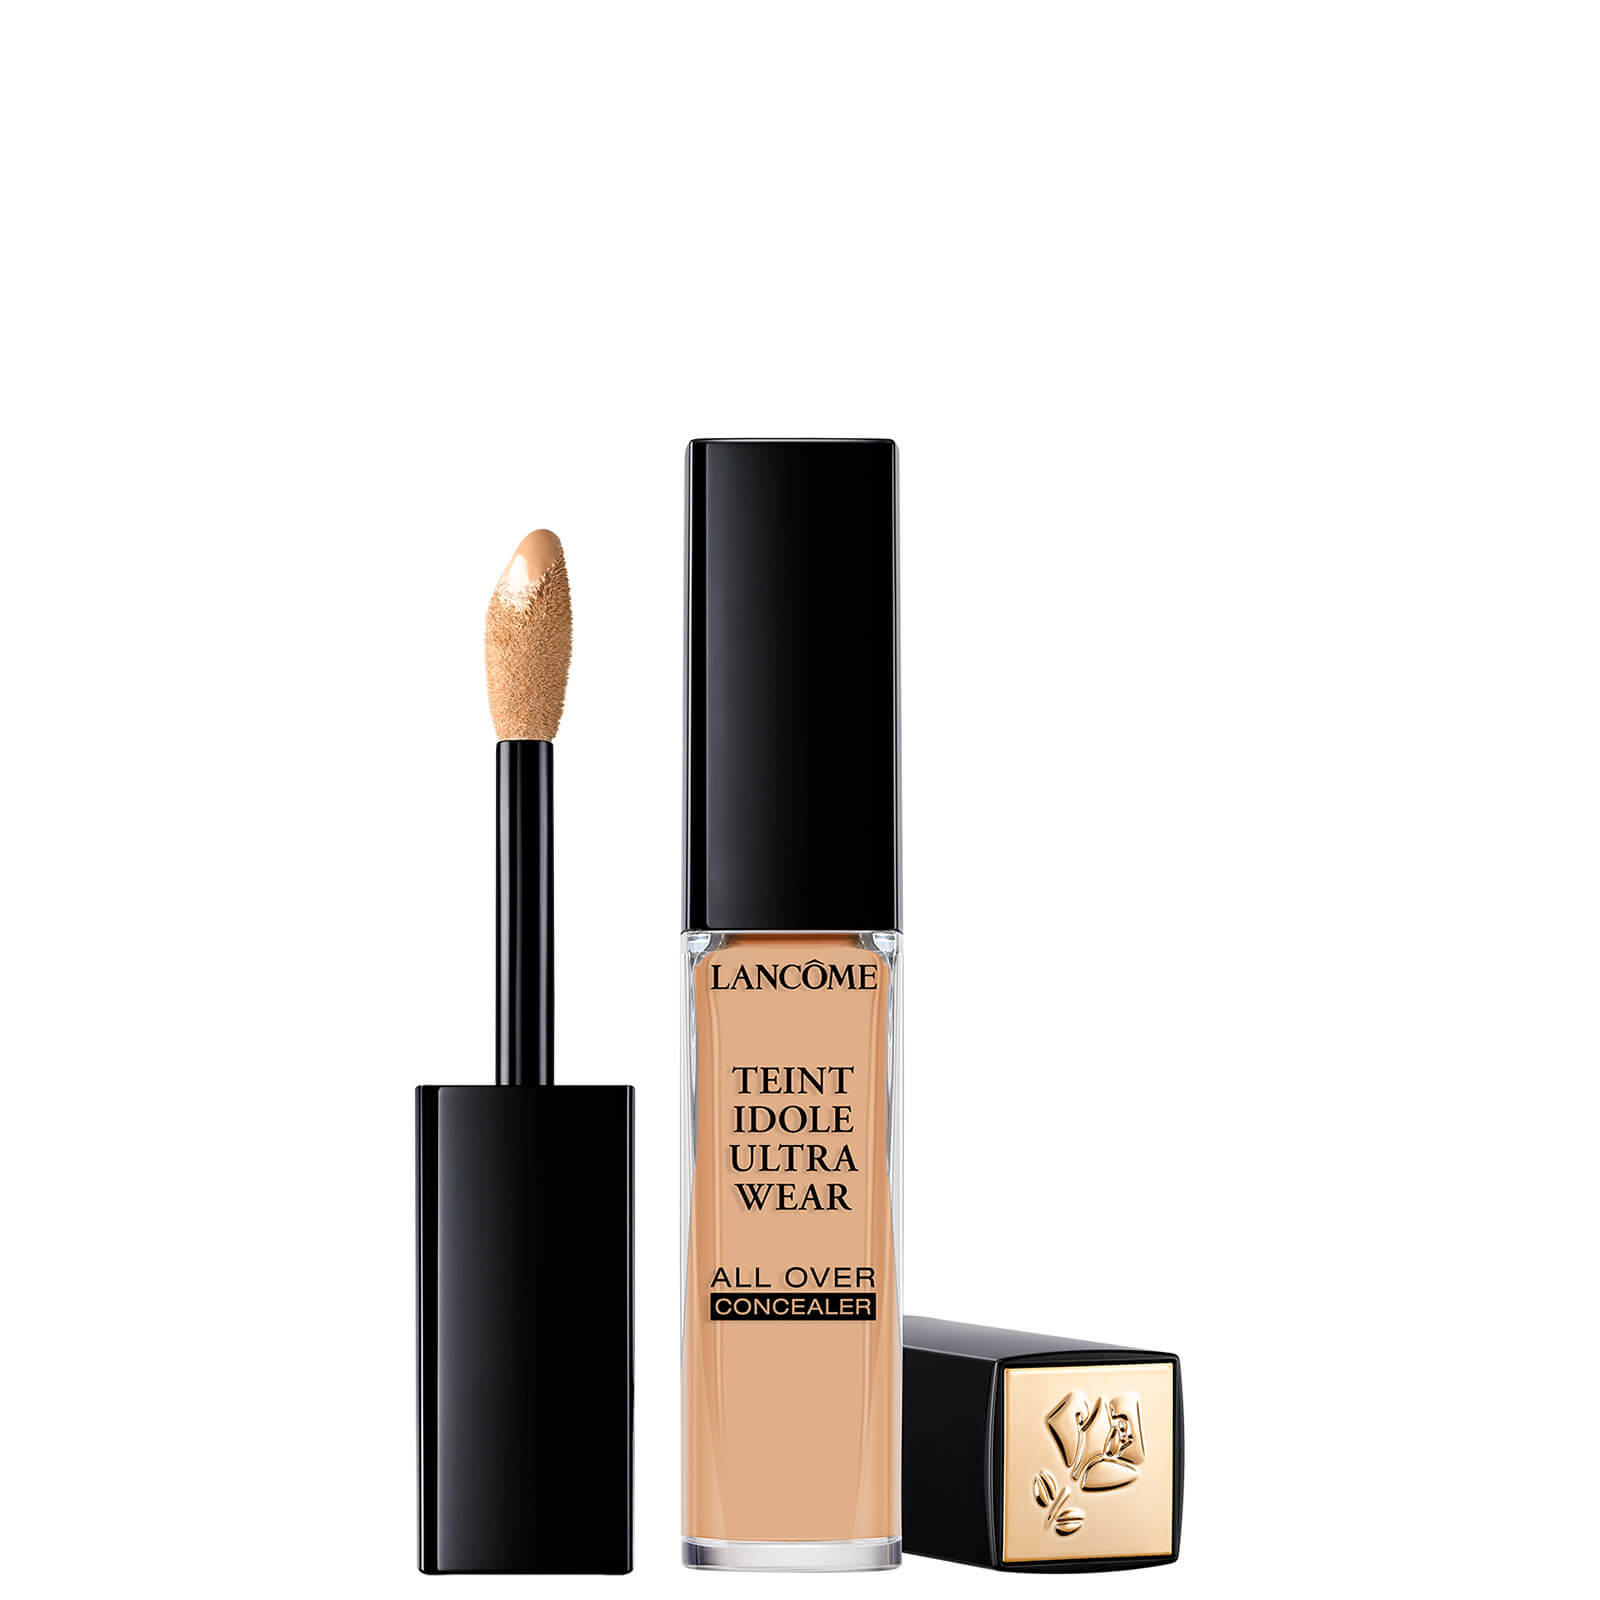 Lancome Teint Idole Ultra Wear All Over Concealer 13ml (Various Shades) - 03 Beige Diaphane